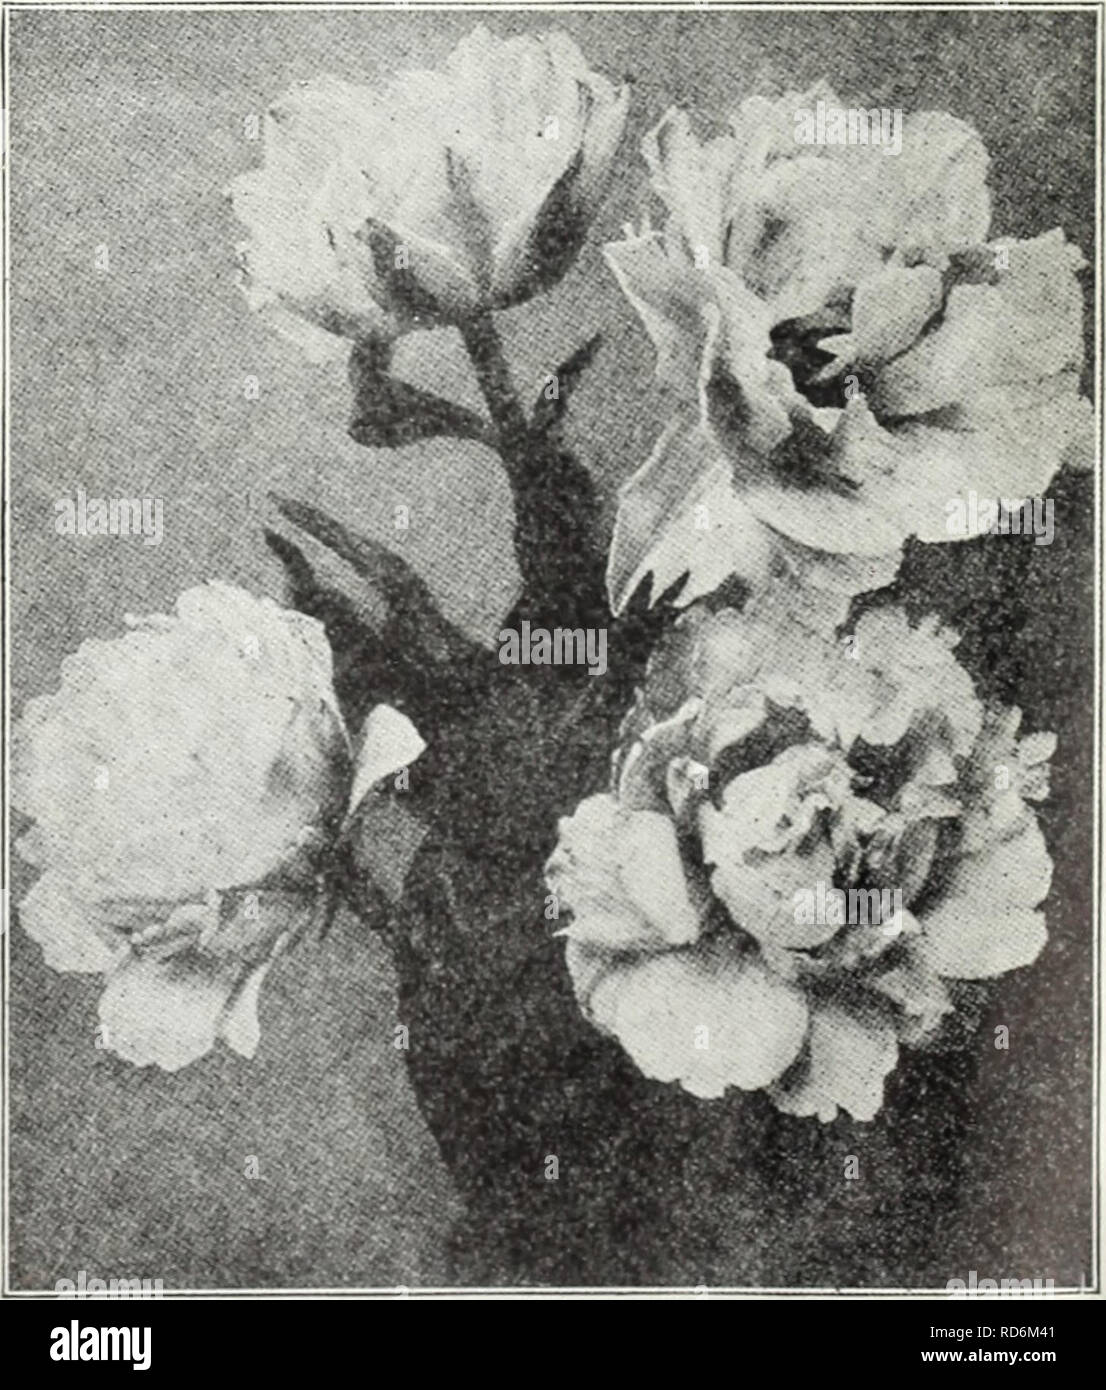 . Currie's bulbs and plants : autumn 1928. Flowers Seeds Catalogs; Bulbs (Plants) Seeds Catalogs; Nurseries (Horticulture) Catalogs; Plants, Ornamental Catalogs. Tulip Chryselora Early Double Flowering Tulips Doz. 100 Azalea (E. S) Beautiful deep rose flushed salmon 550.90 .l!«.r&gt;0 Boule lie ei«:e (E. 10) — Large pure white .85 (J.OO Couronne d'Or (Crorn of Gold) — (E. 10) Flower large and very double, rich golden yellow shaded orange S.&quot;i (5.00 Klectra (E. S) — Carmine shaded light violet l.'2H 9.0O caoria Soils — (E. 9) Very large crimson with broad golden margin 85 (5.00 Miirillo ( Stock Photo